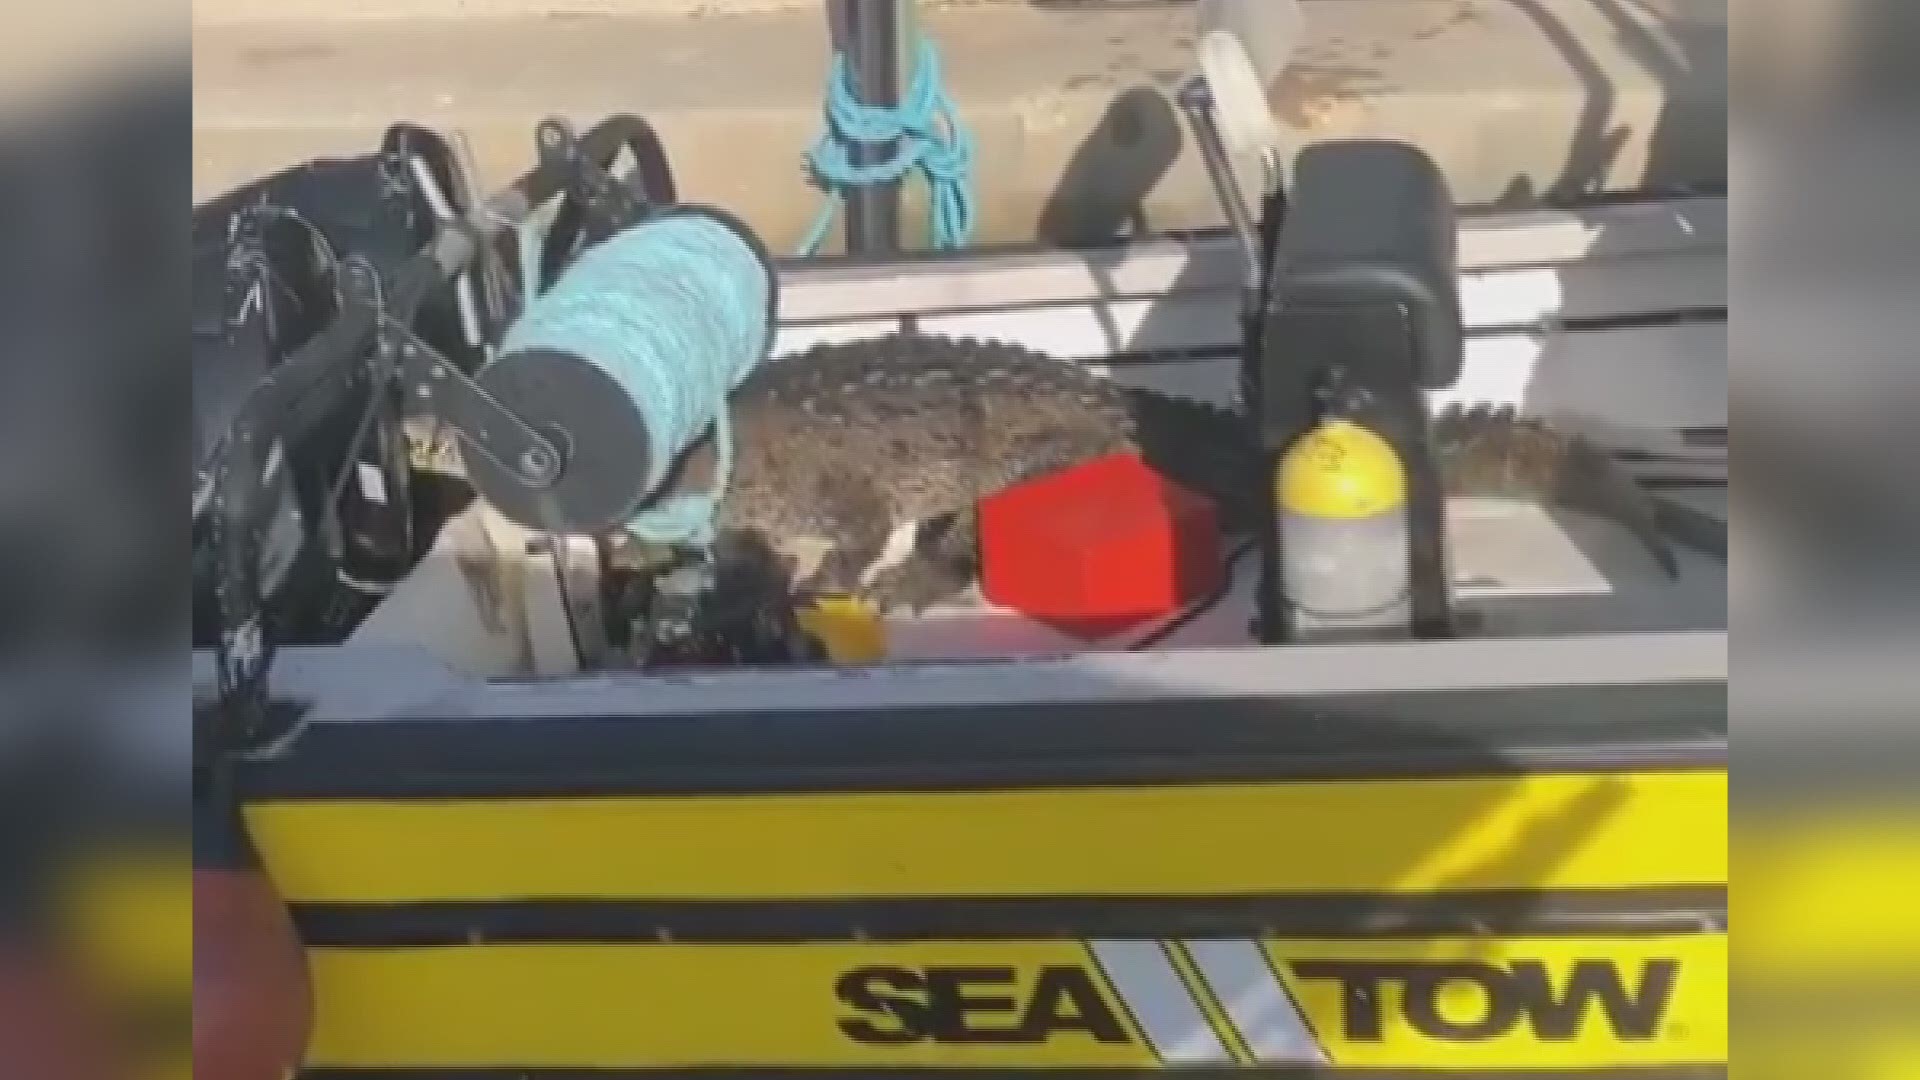 Surprise, there's a crocodile in your boat!

A Miami-based Sea Tow crew came across the toothy reptile in one of its boats stationed at Black Point Marina's fuel dock.

The crocodile was spotted rummaging about the boat before climbing out. (Video: @cjmiami Instagram)